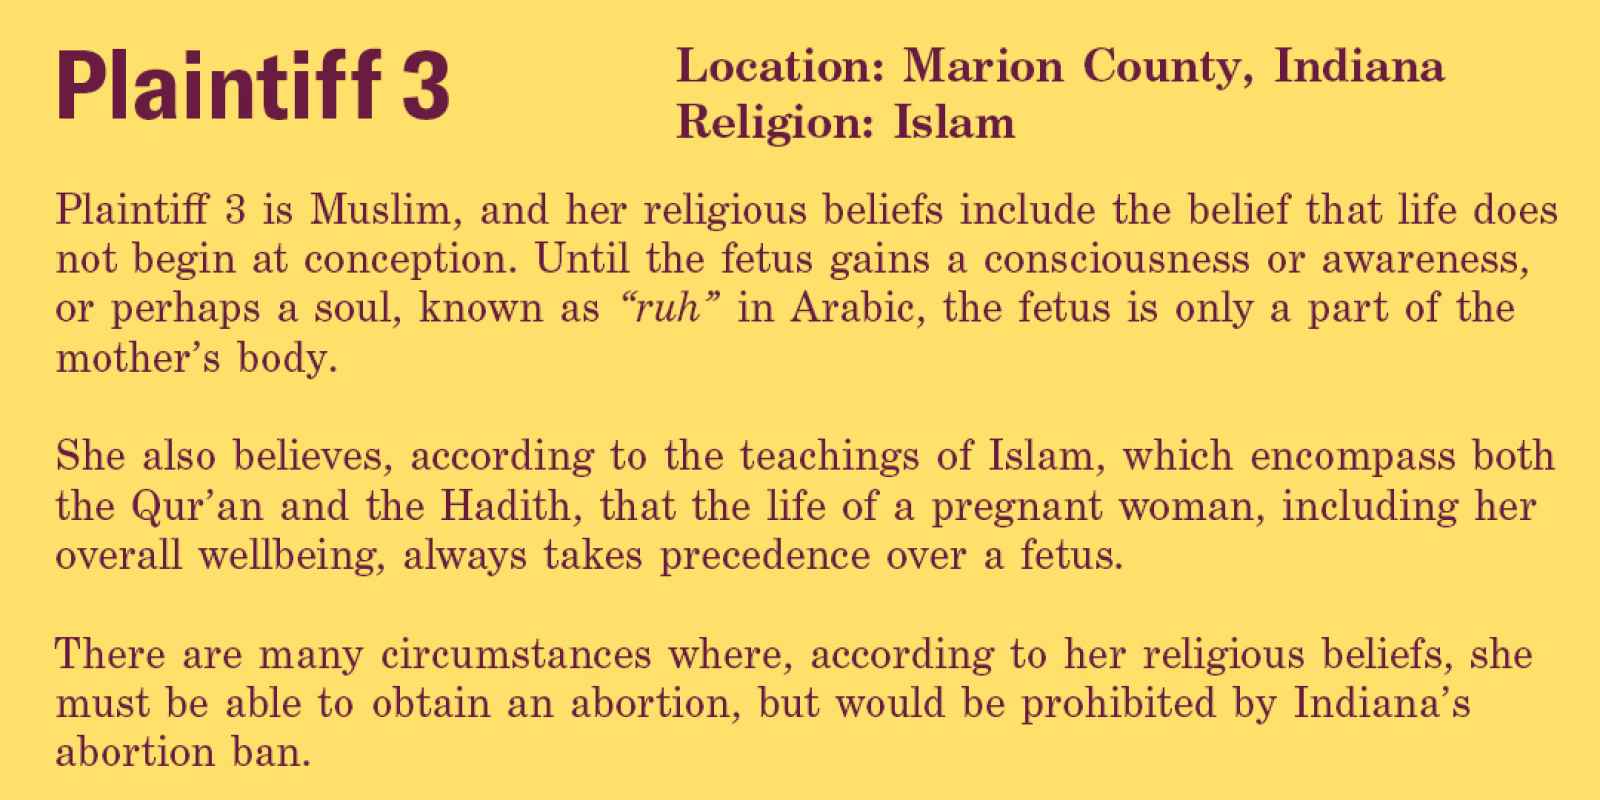 Plaintiff 3 is Muslim, and her religious beliefs include the belief that life does not begin at conception. Until the fetus gains a consciousness or awareness, or perhaps a soul, known as “ruh” in Arabic, the fetus is only a part of the mother’s body.   S